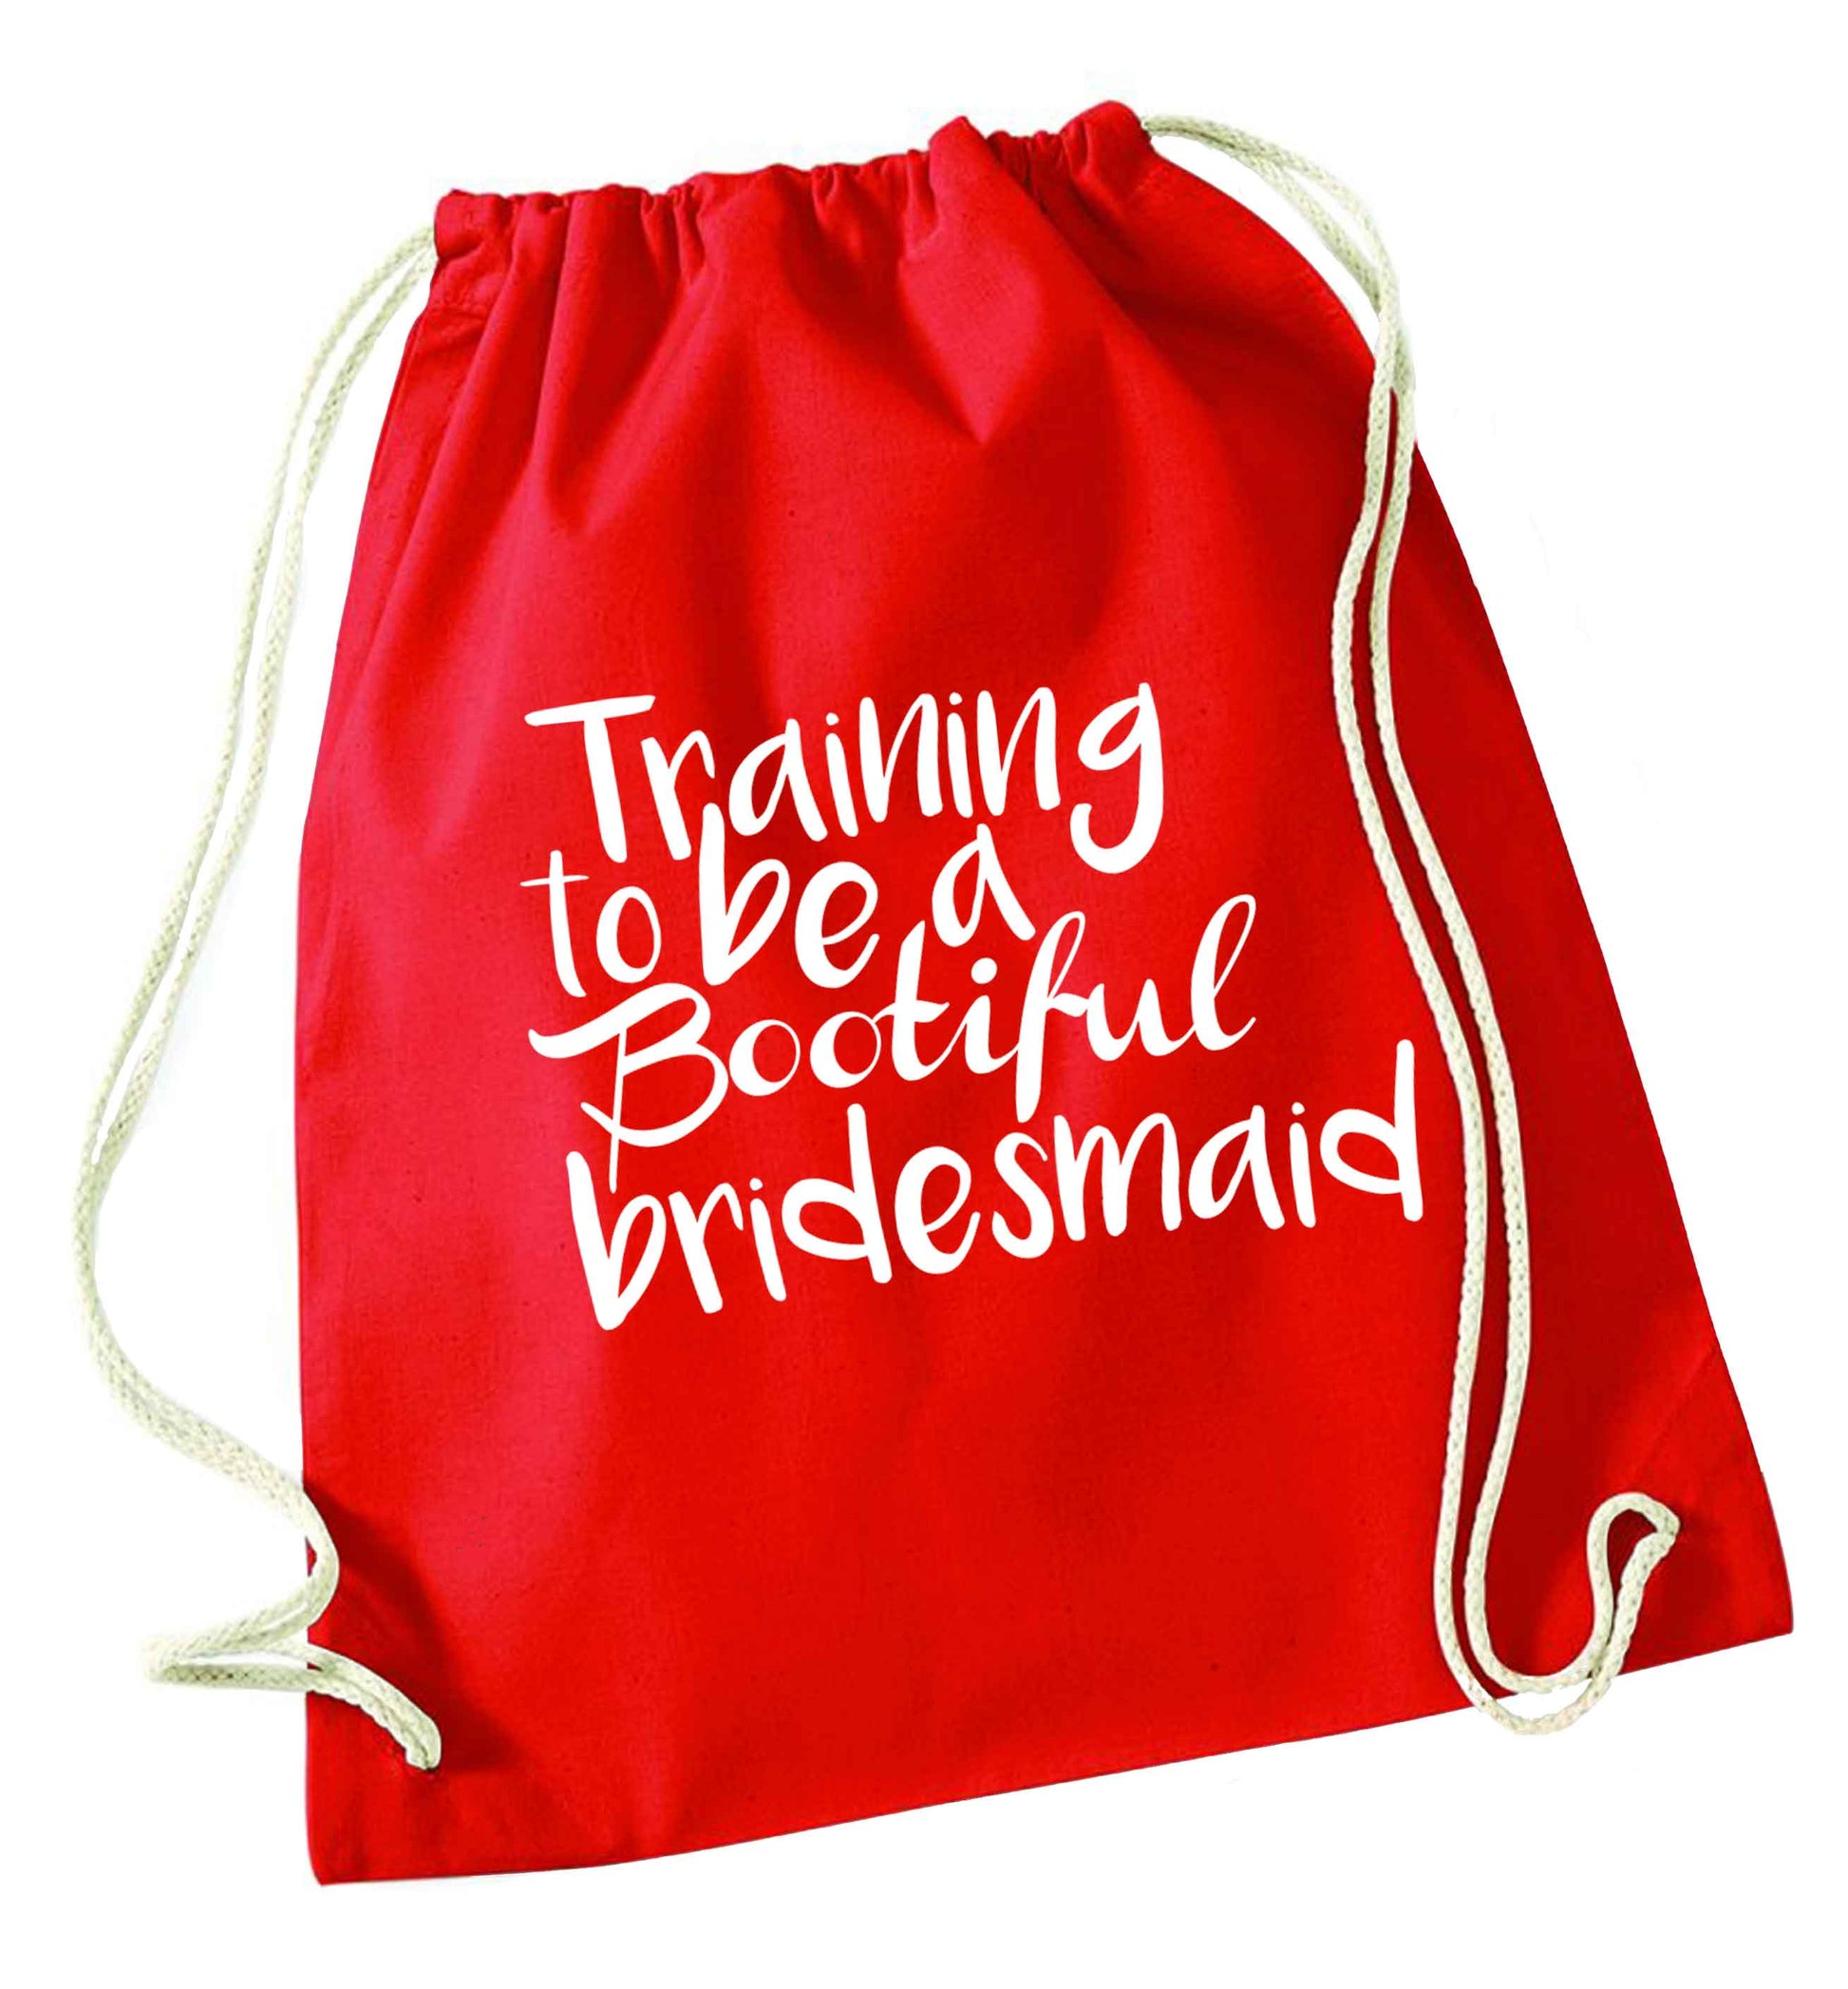 Get motivated and get fit for your big day! Our workout quotes and designs will get you ready to sweat! Perfect for any bride, groom or bridesmaid to be!  red drawstring bag 